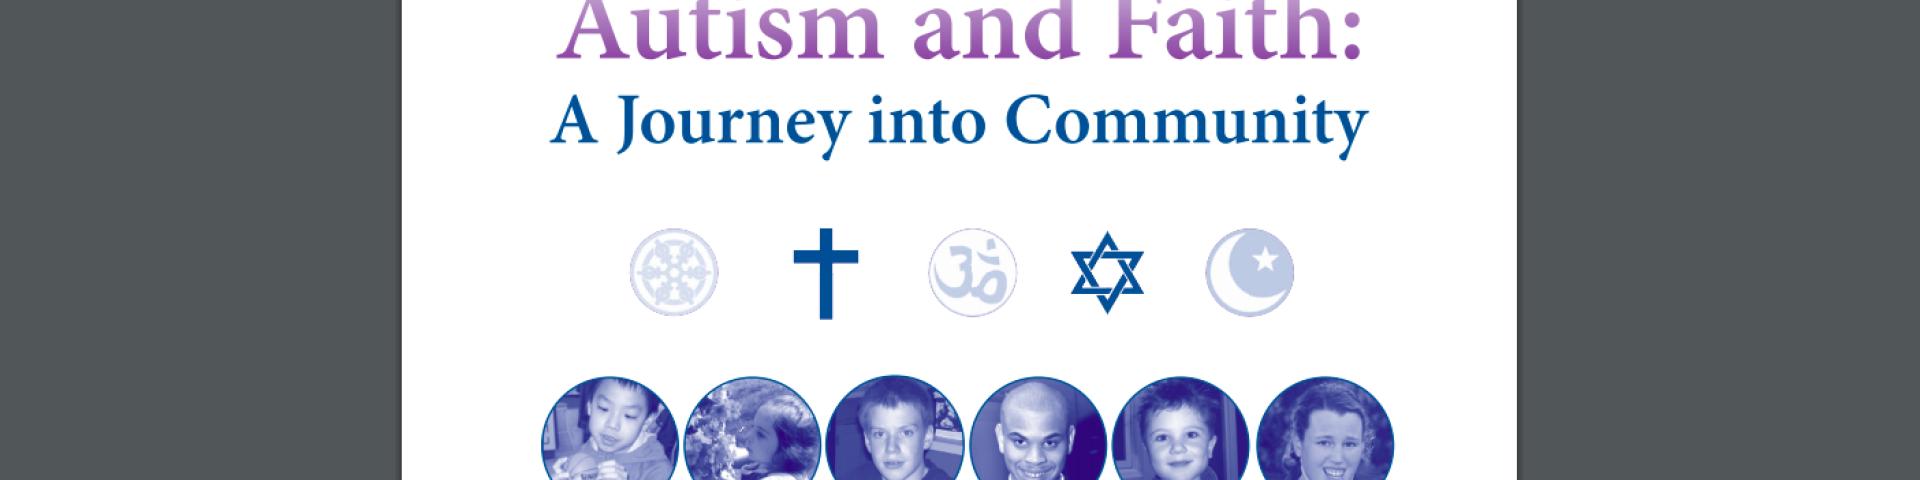 Text: Autism and Faith with religious symbols below 